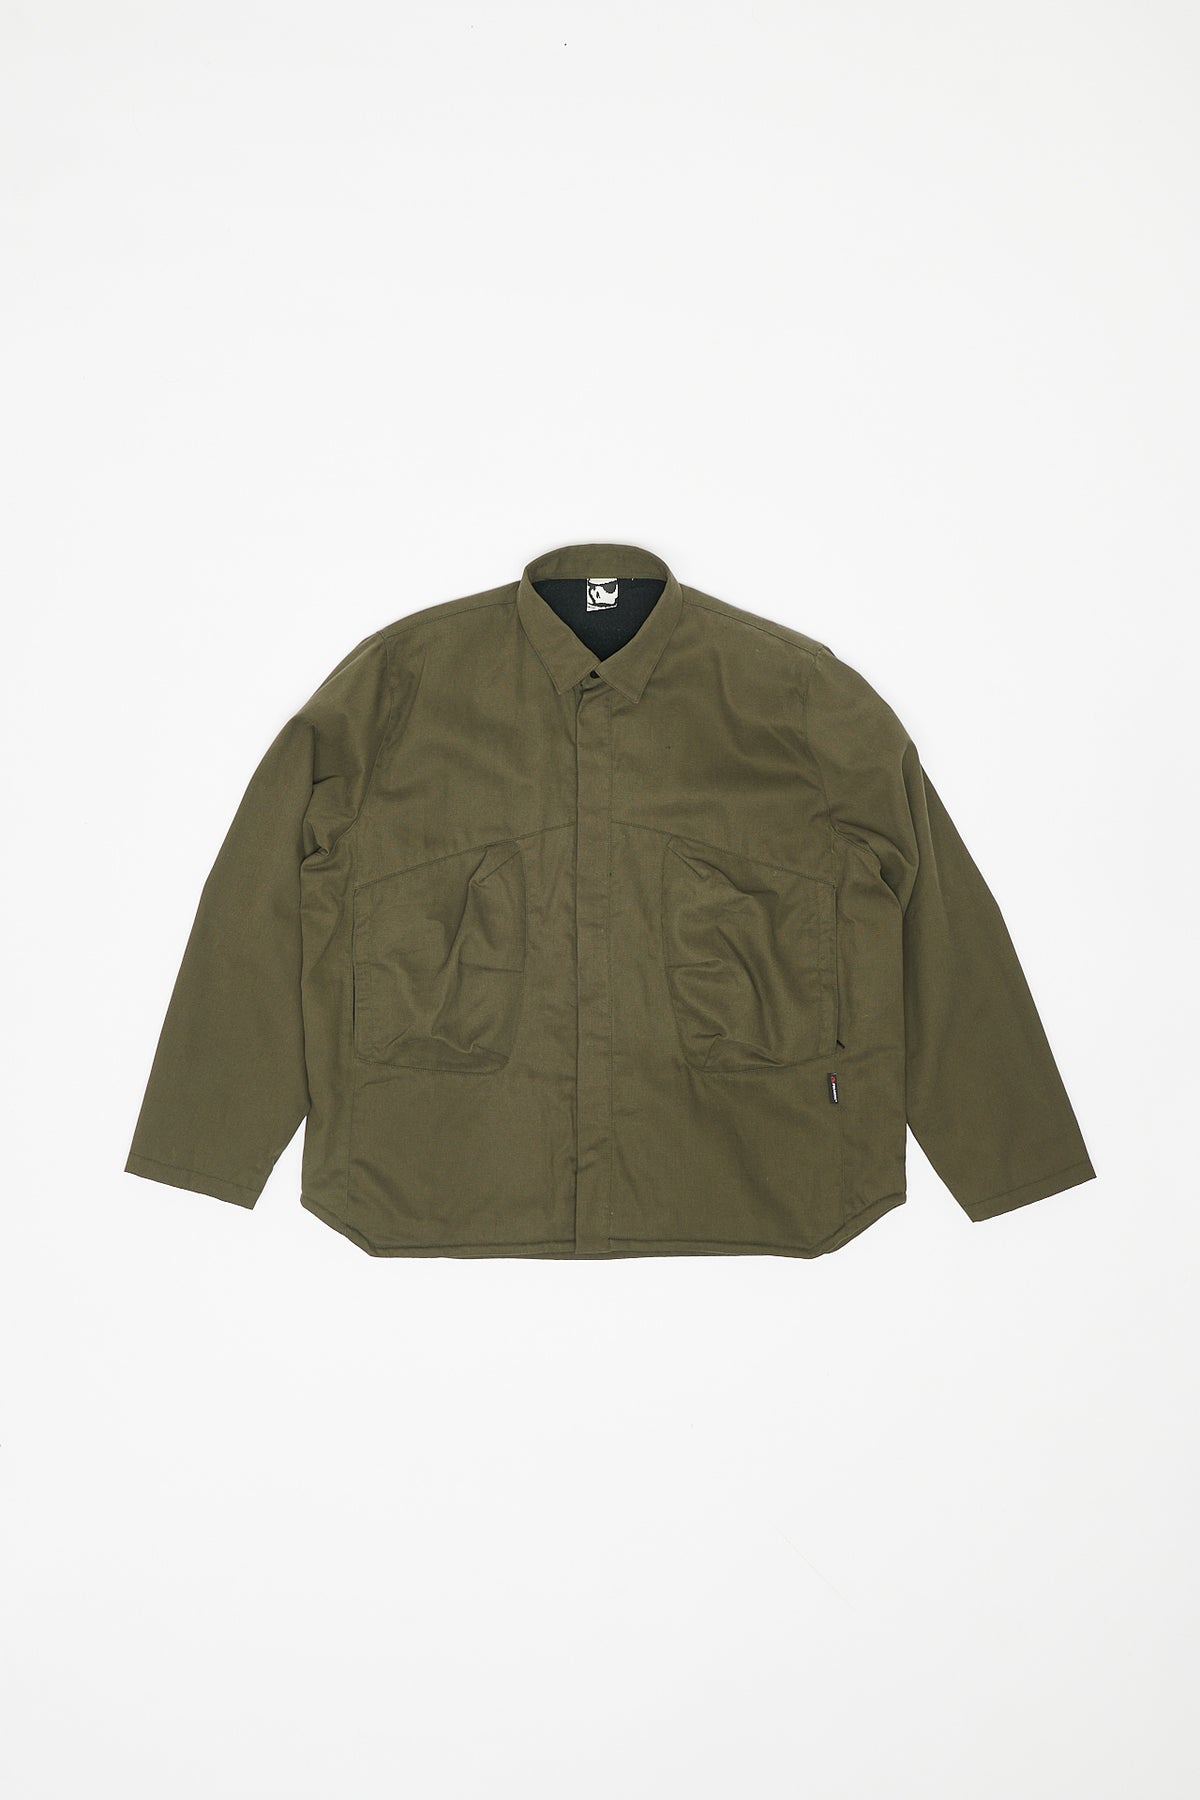 RESCUE POCKET OVERSHIRT - MILITARY GREEN